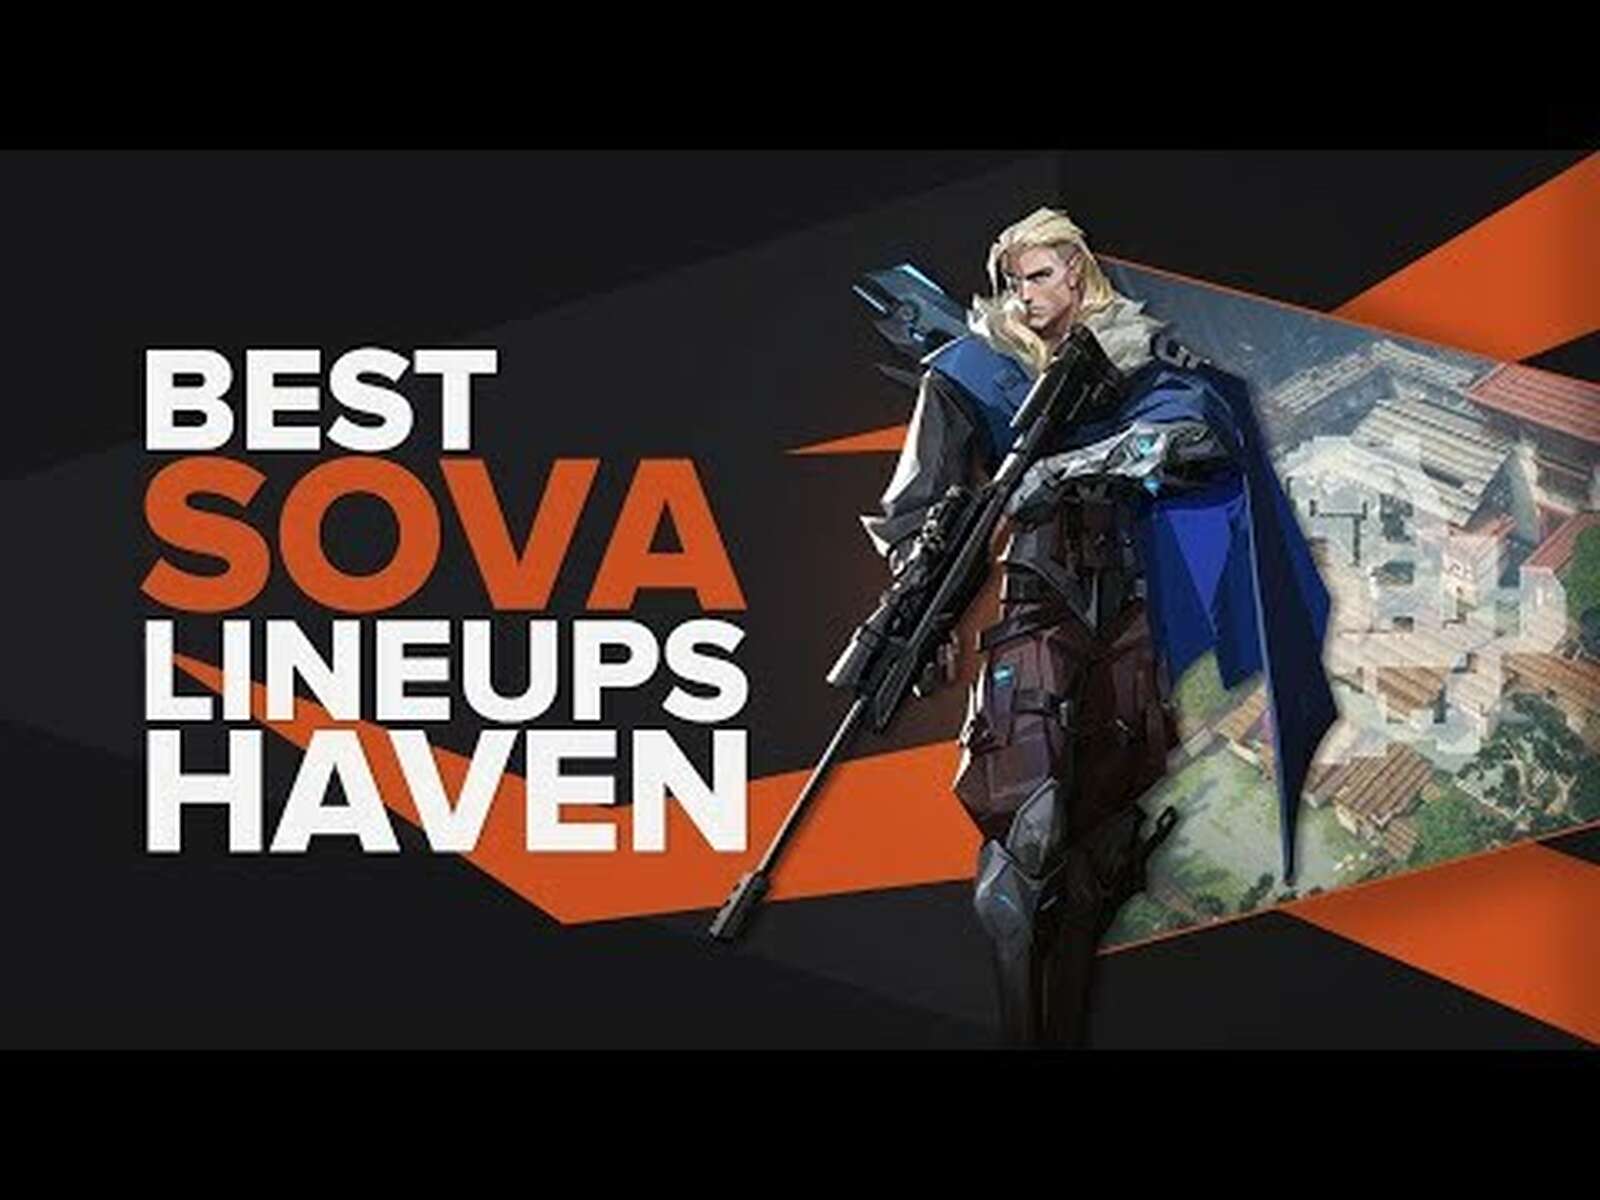 The Best Sova Lineups on Haven